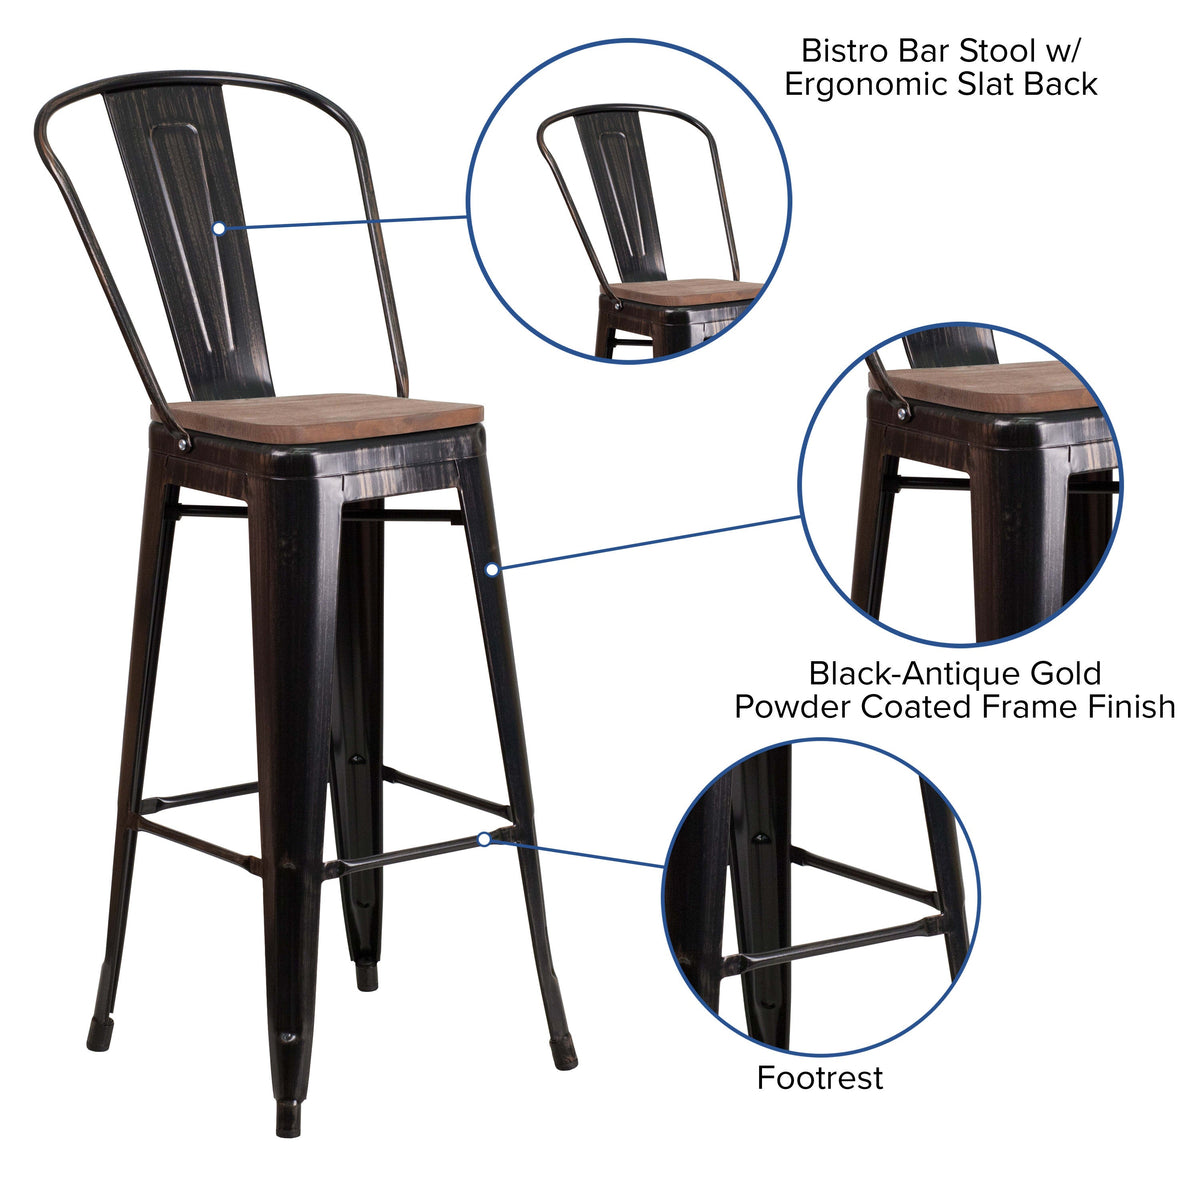 Black-Antique Gold |#| 30inch High Black-Antique Gold Metal Barstool with Back and Wood Seat - Kitchen